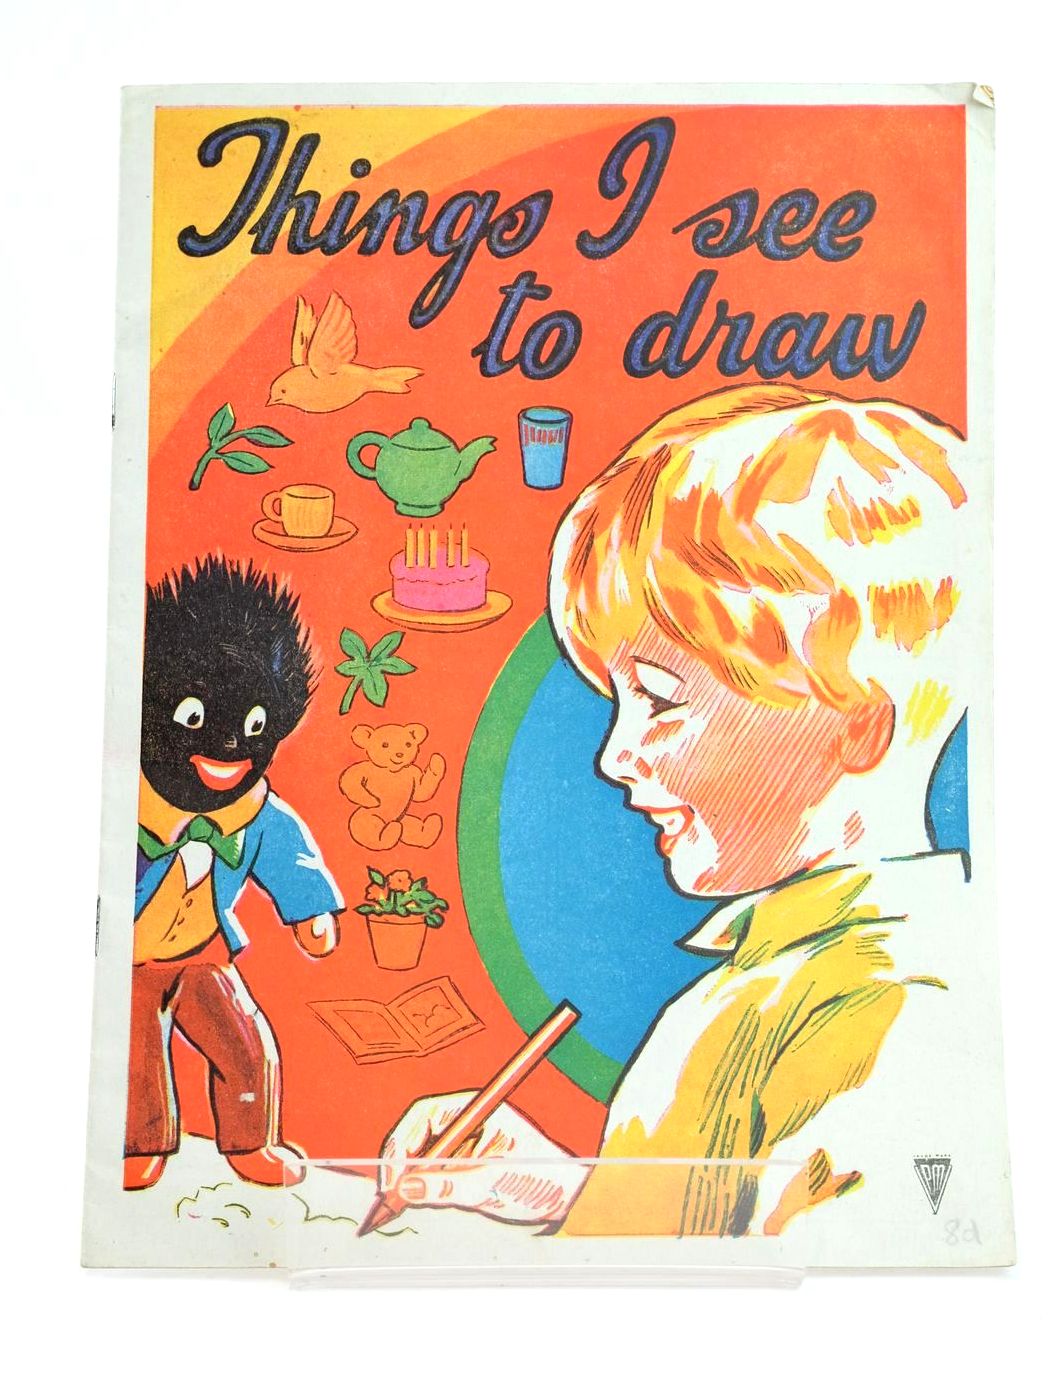 Photo of THINGS I SEE TO DRAW published by P.M. (Productions) Ltd. (STOCK CODE: 1318562)  for sale by Stella & Rose's Books